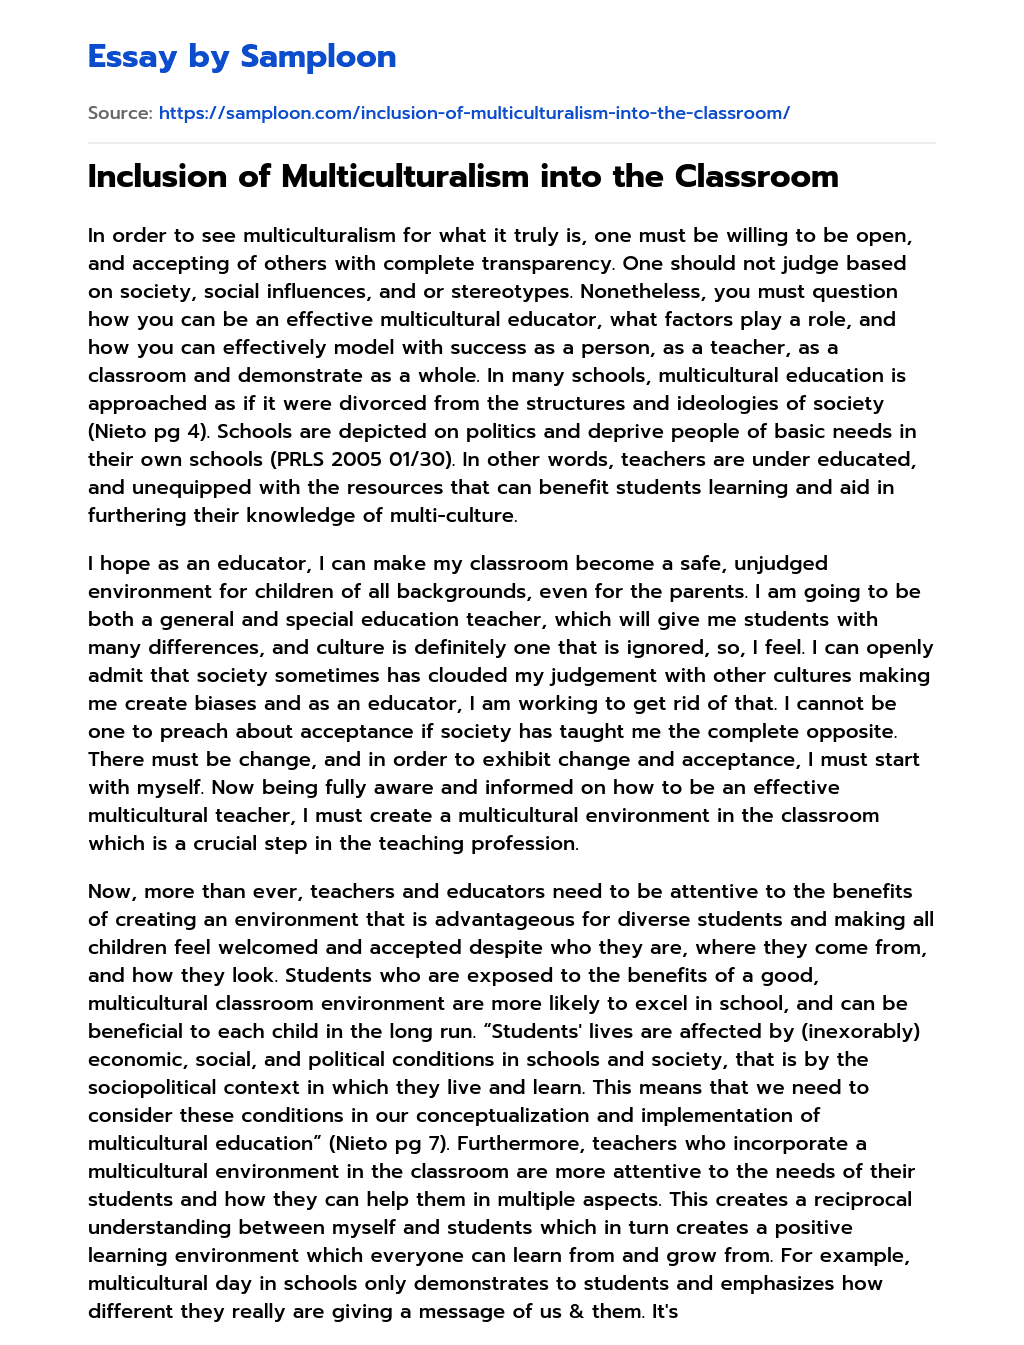 Inclusion of Multiculturalism into the Classroom essay